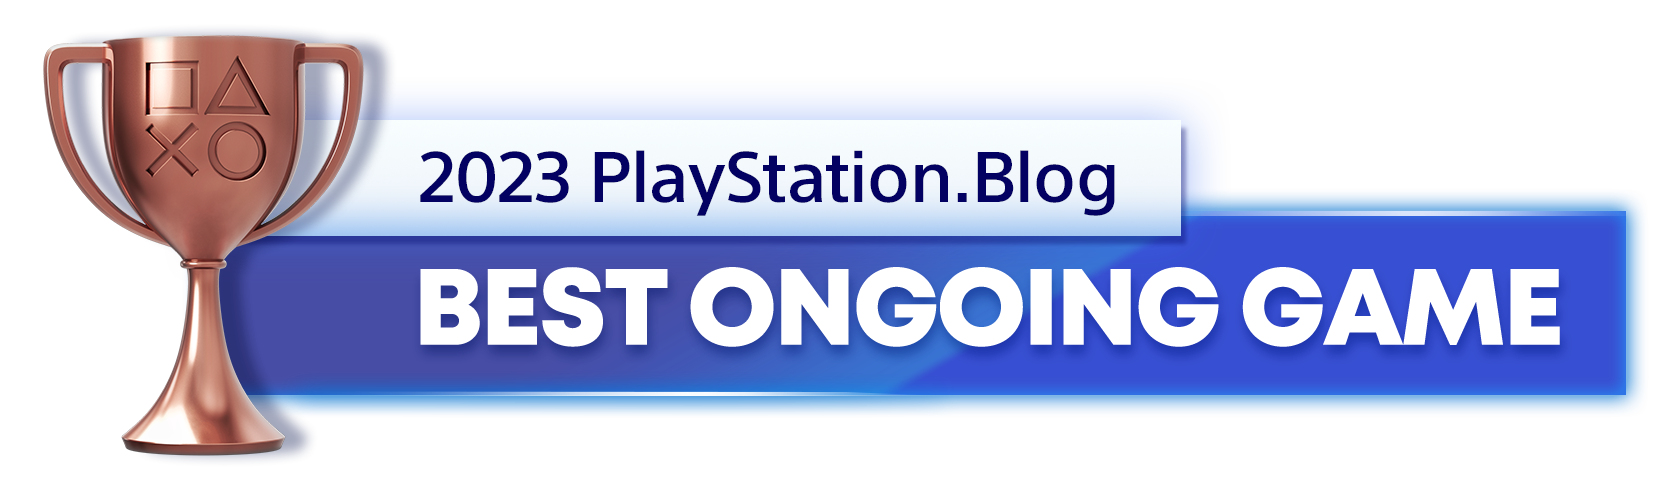  "Bronze Trophy for the 2023 PlayStation Blog Best Ongoing Game Winner"